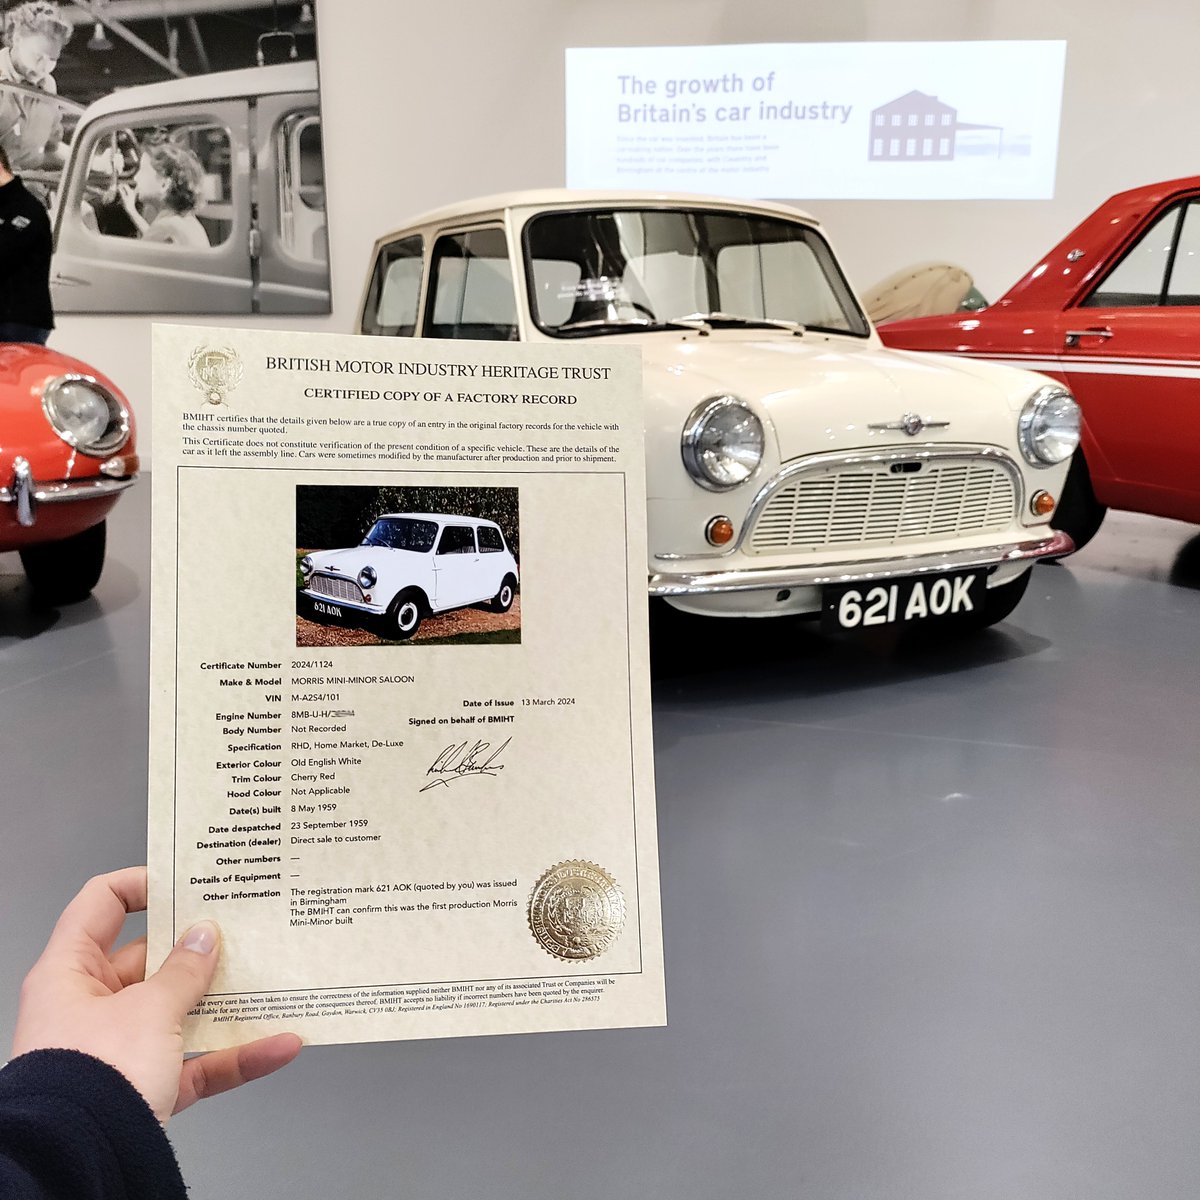 Celebrating 65 years of the Morris Mini-Minor 👏 The first production Morris Mini-Minor, 621 AOK, was built 8 May 1959 - as you can see on its Heritage Certificate! 📄 Want a Heritage Certificate for your British classic? Find out more here 👇 shop.britishmotormuseum.co.uk/collections/ce…